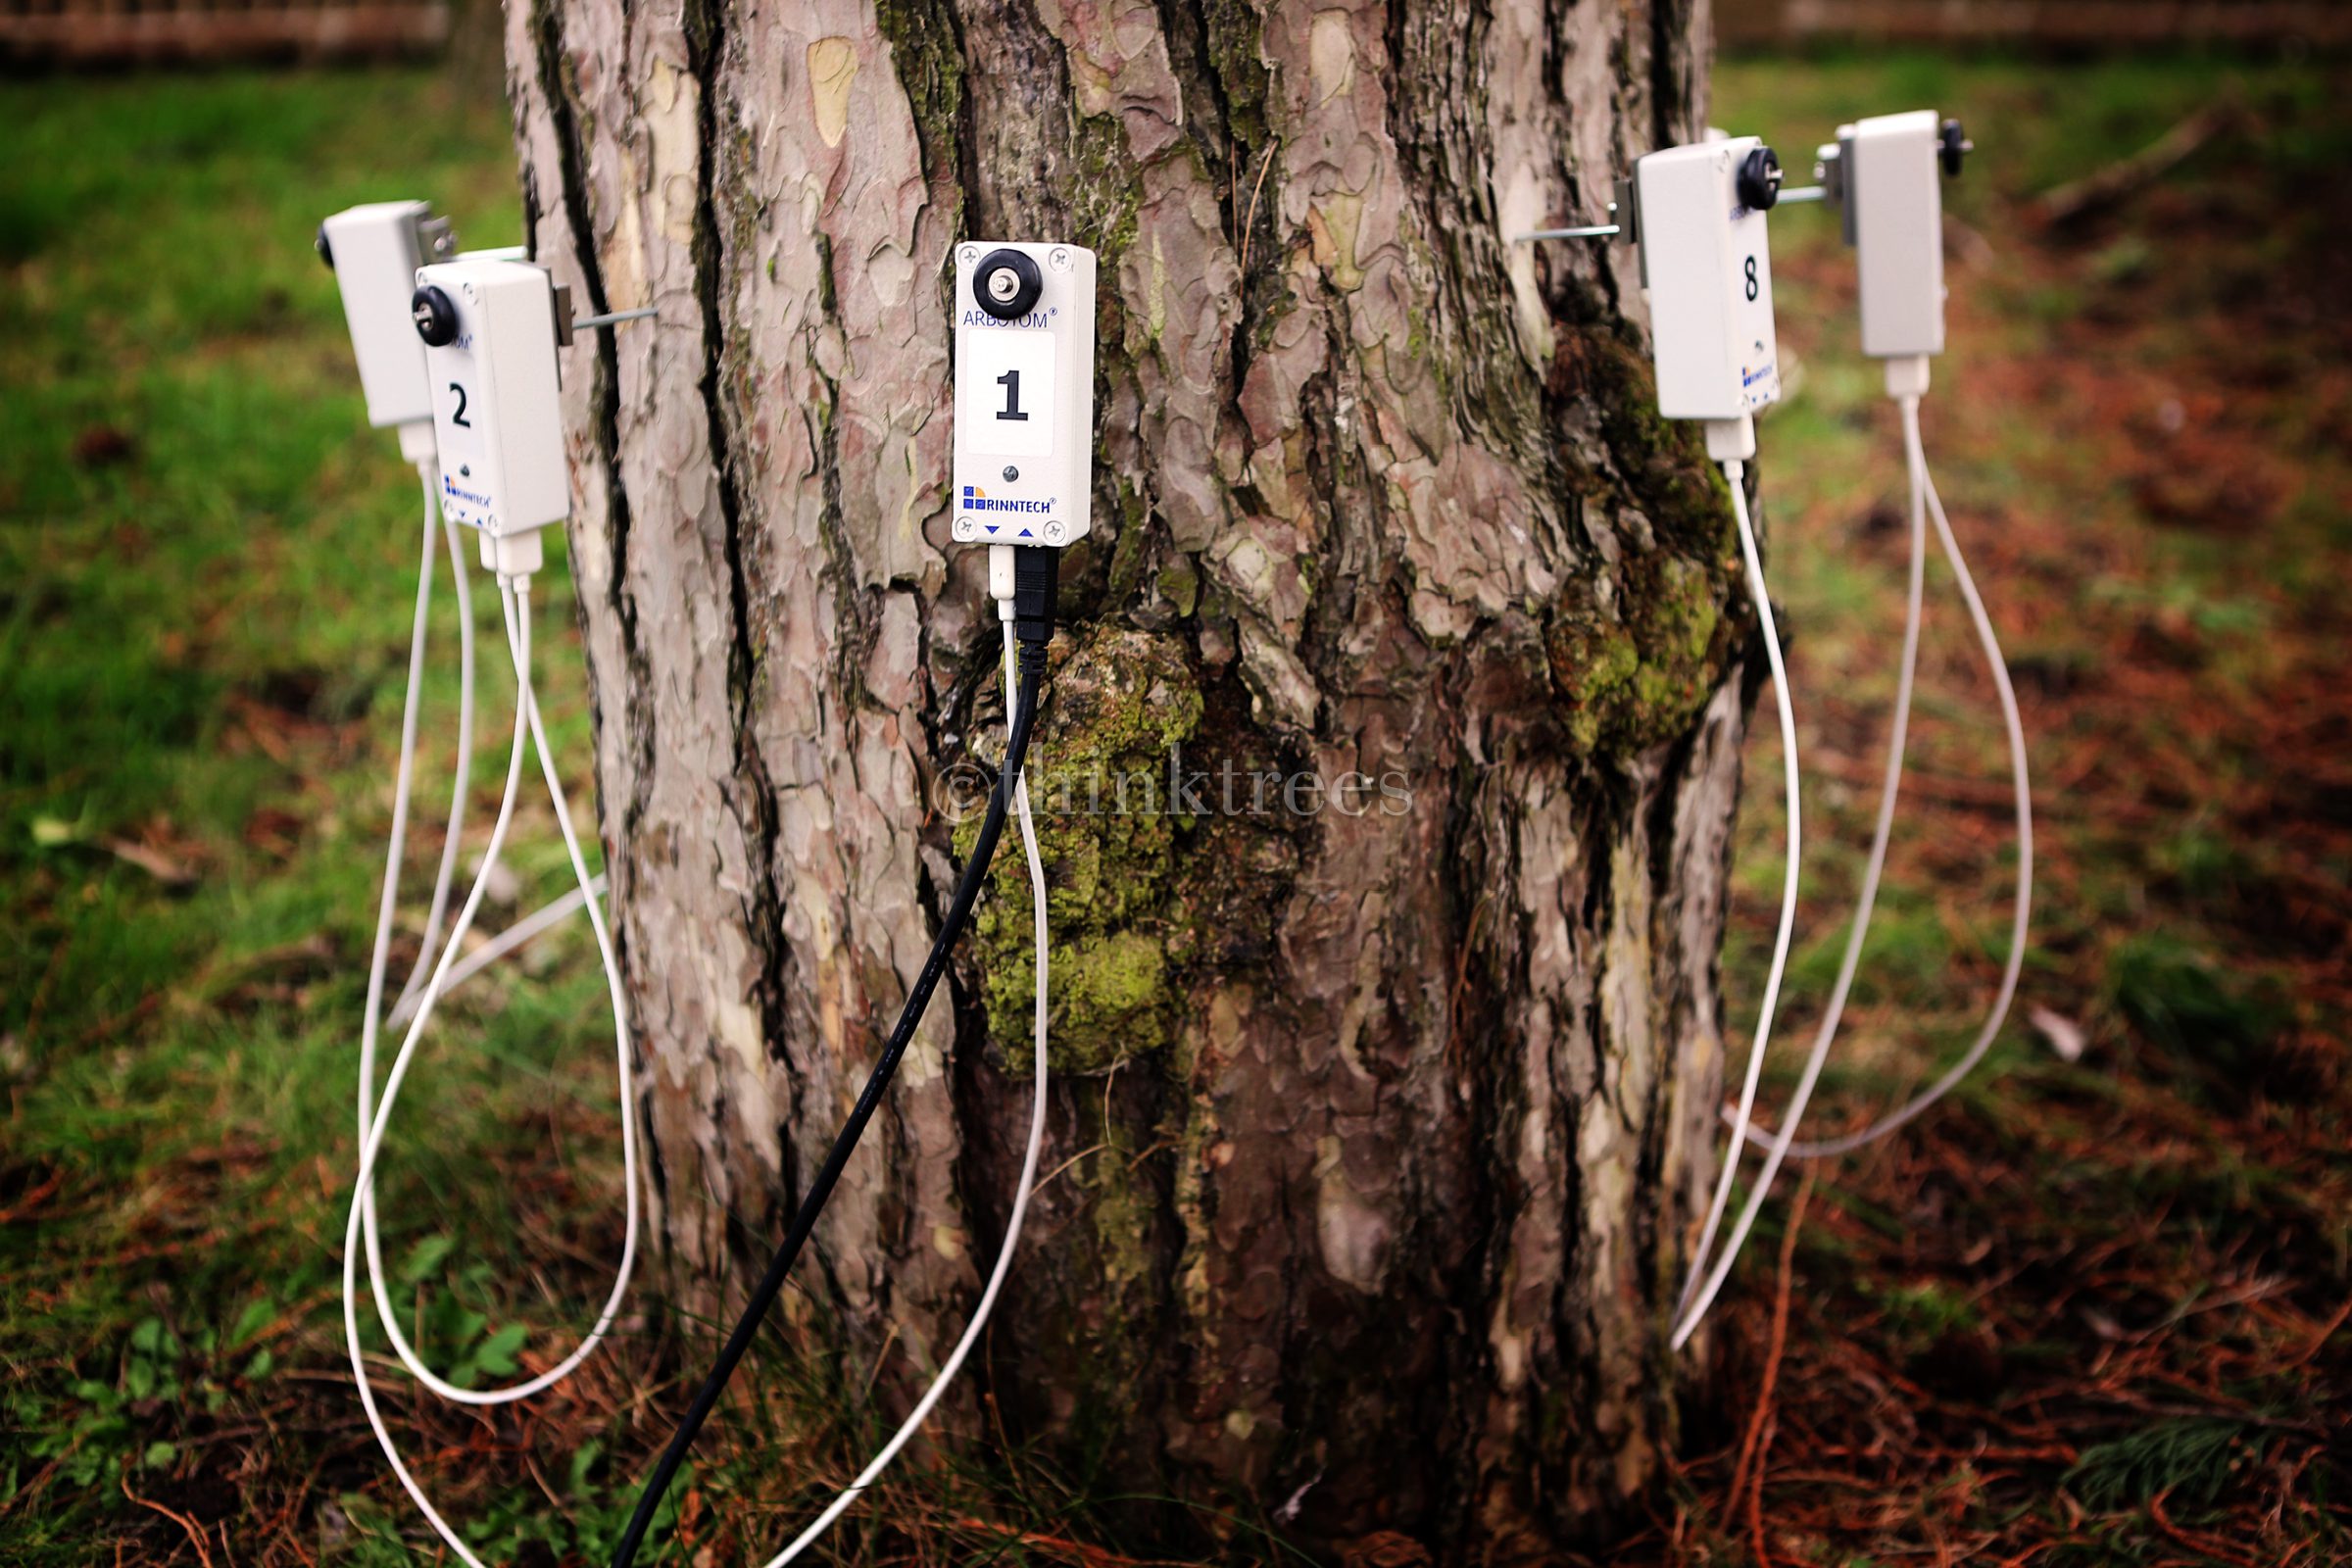 Arbotom sensors positioned around the stem of a pine tree